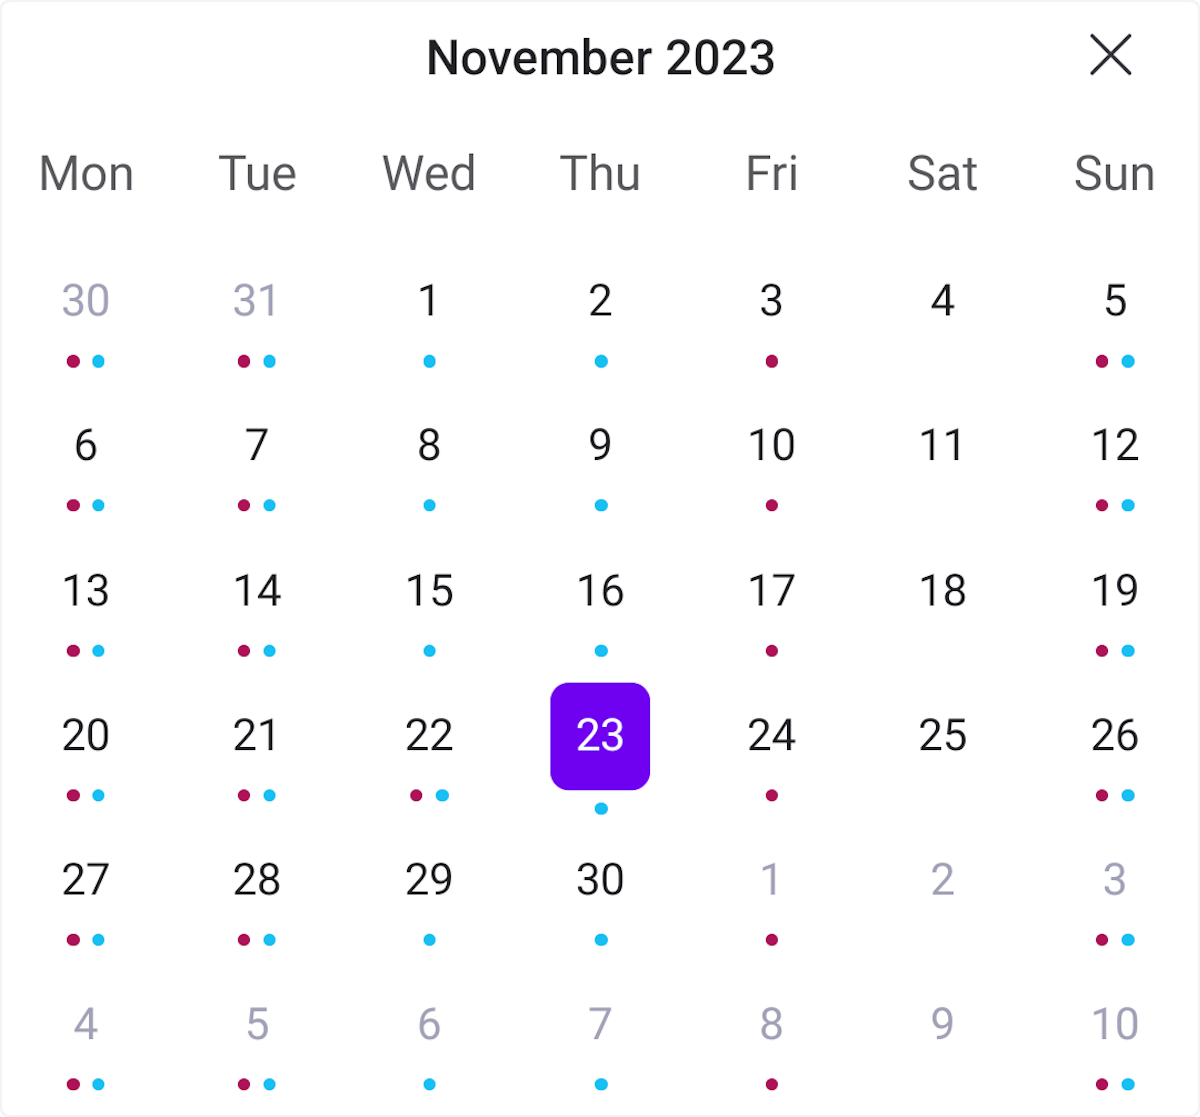 You can select a specific date in this calendar.